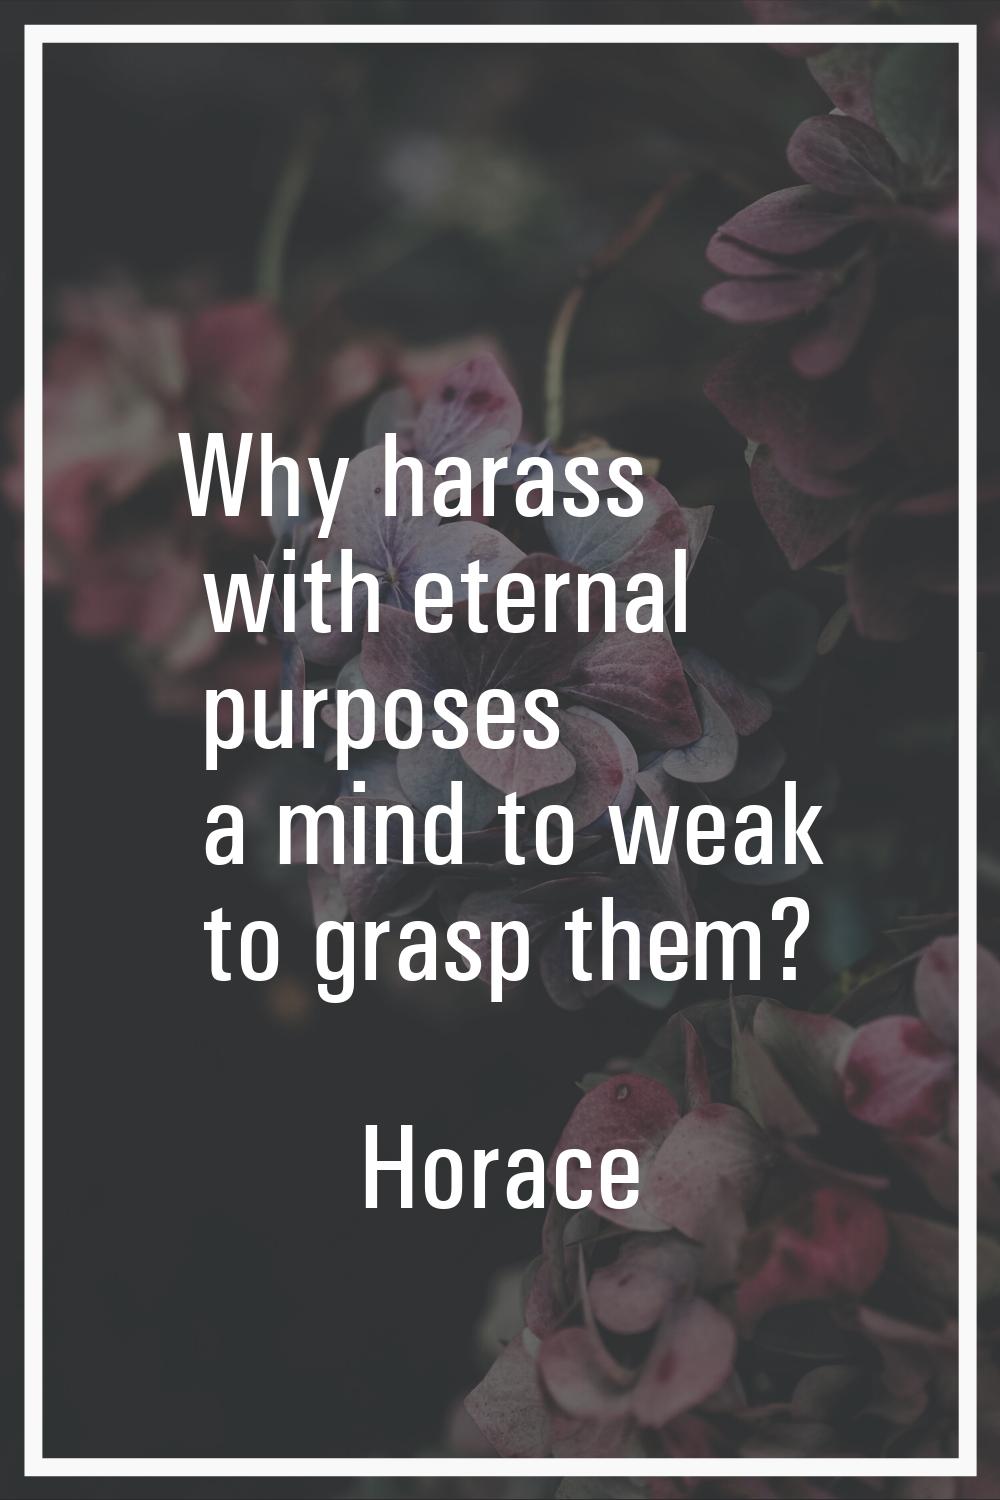 Why harass with eternal purposes a mind to weak to grasp them?